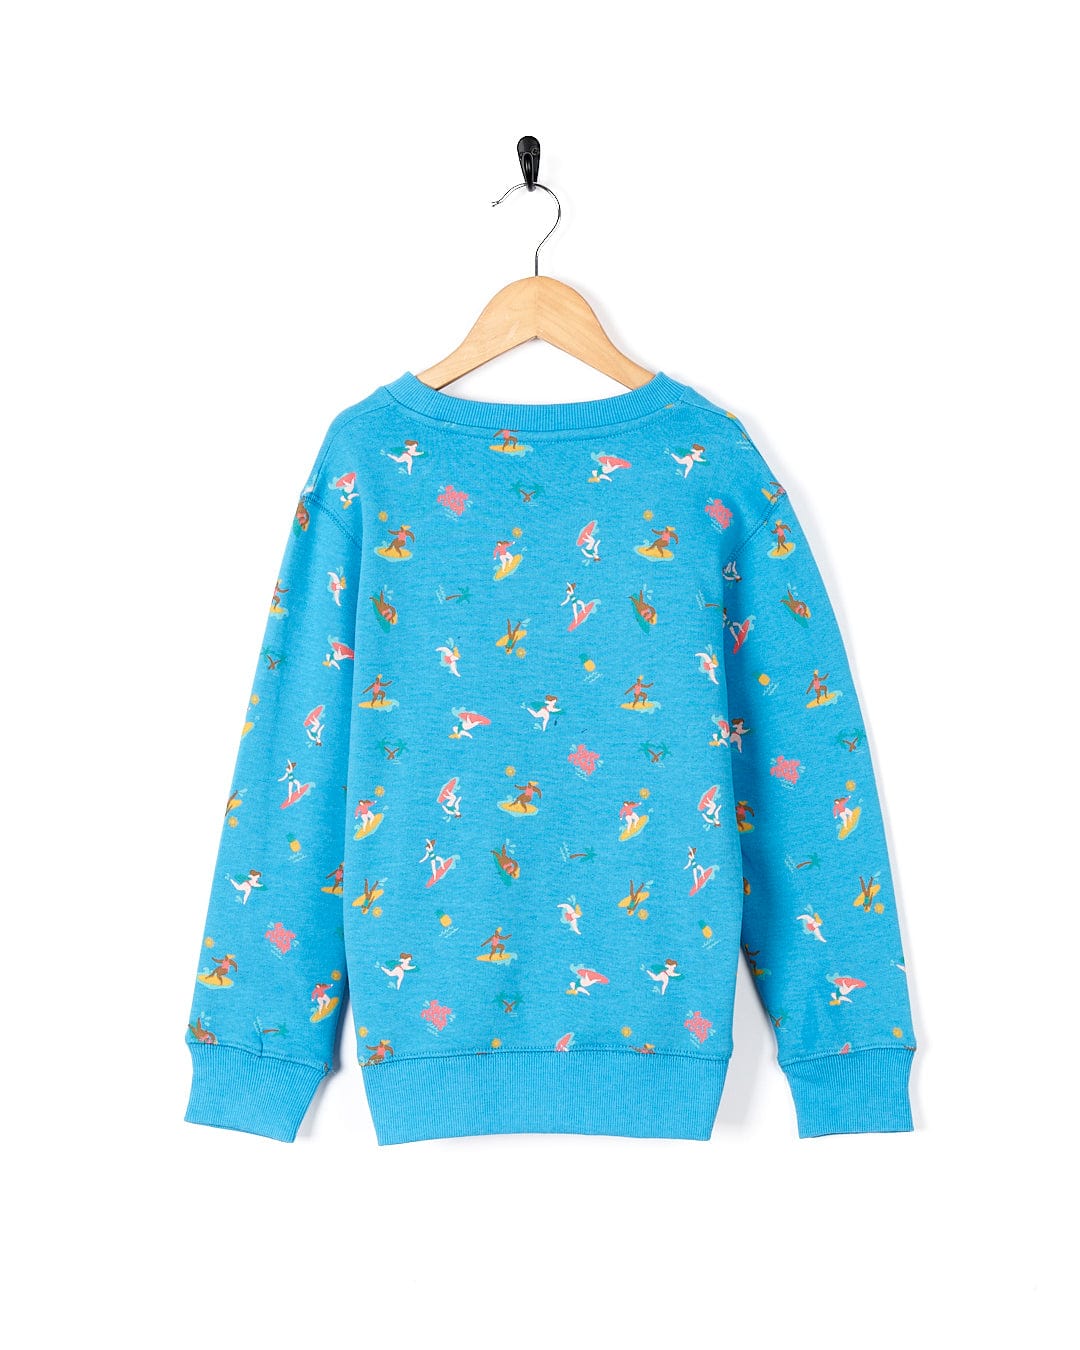 A Saltrock Surf Sisters Kids Recycled Long Sleeve Sweat with birds on it.